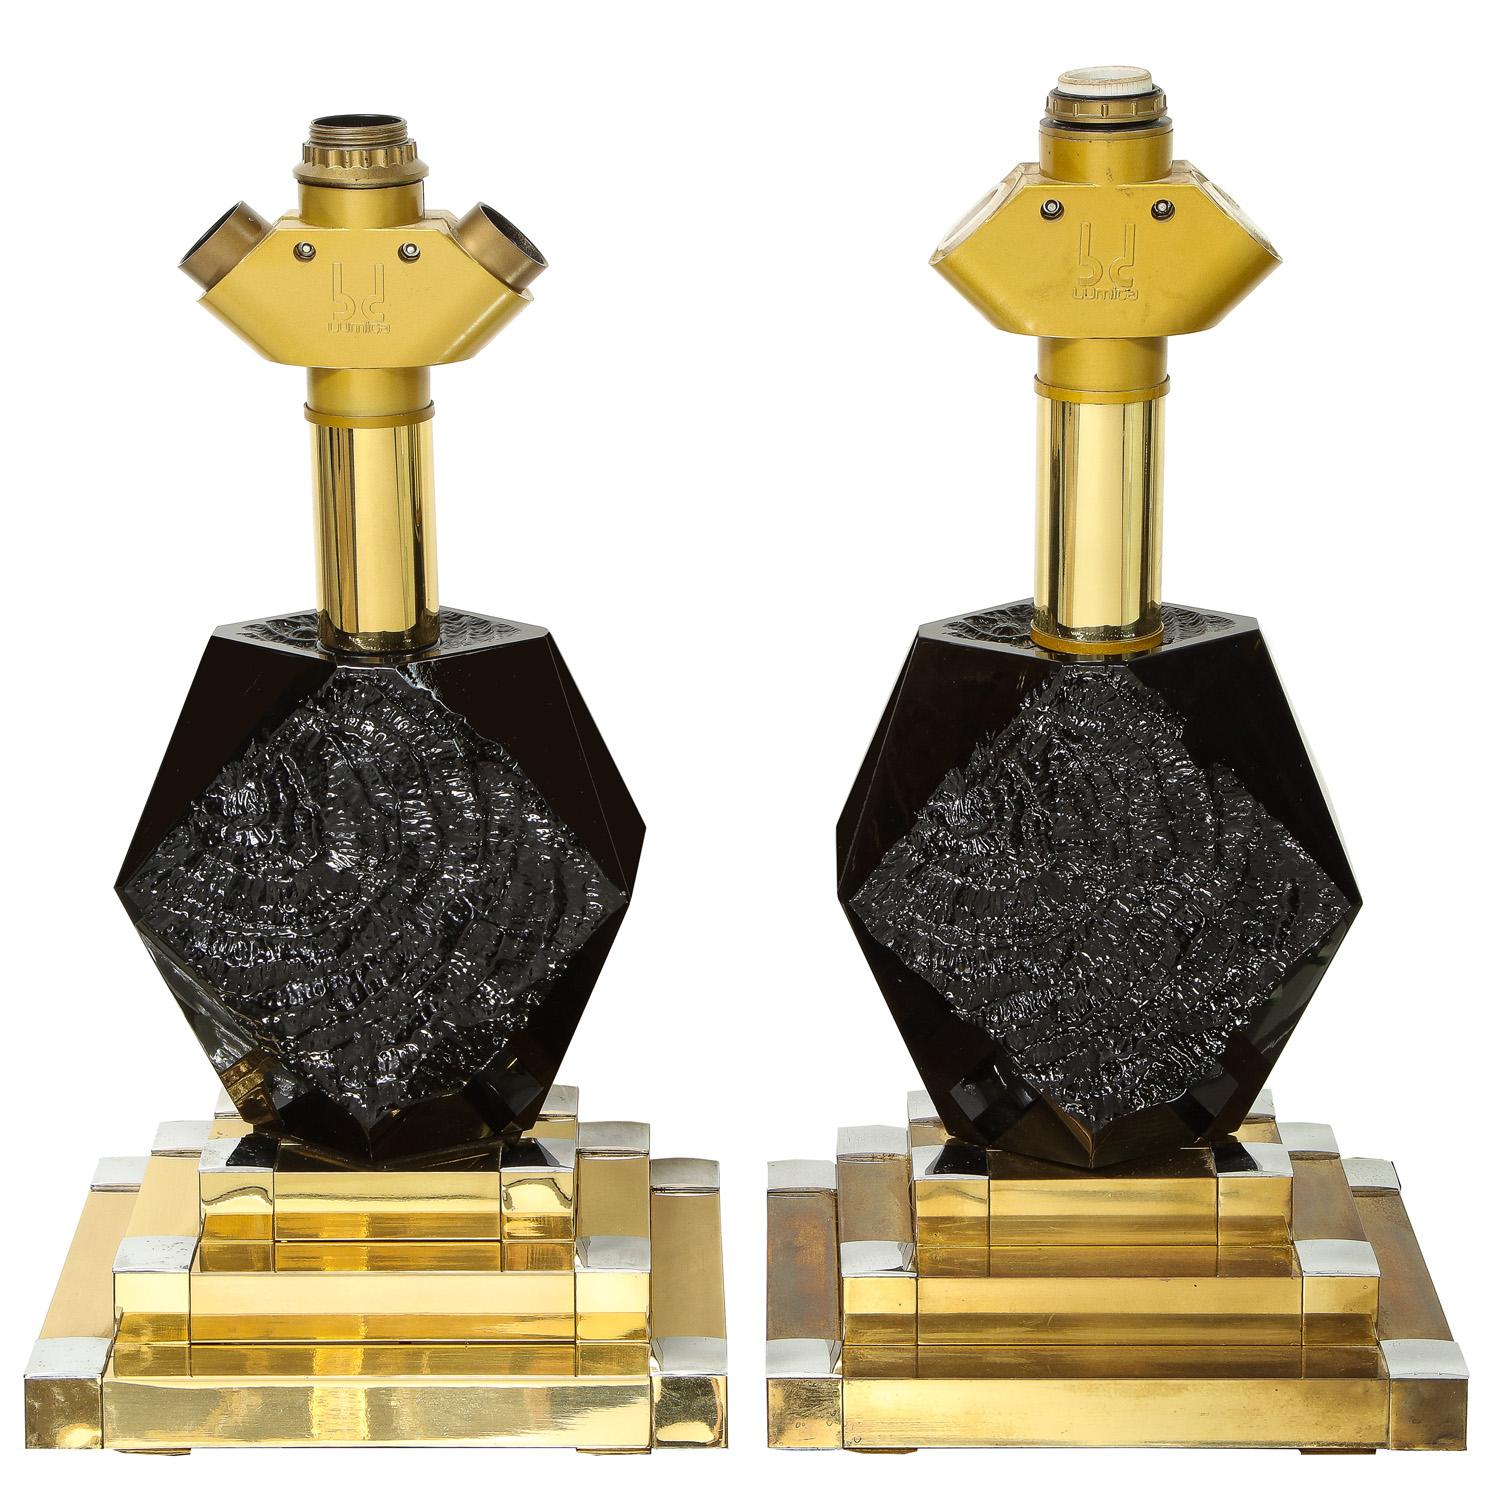 Glamorous pair of black opaline glass and brass table lamps with impressed fossil design and chrome details. Designed by Willy Rizzo for BD Lumica, Spain 1970's.

